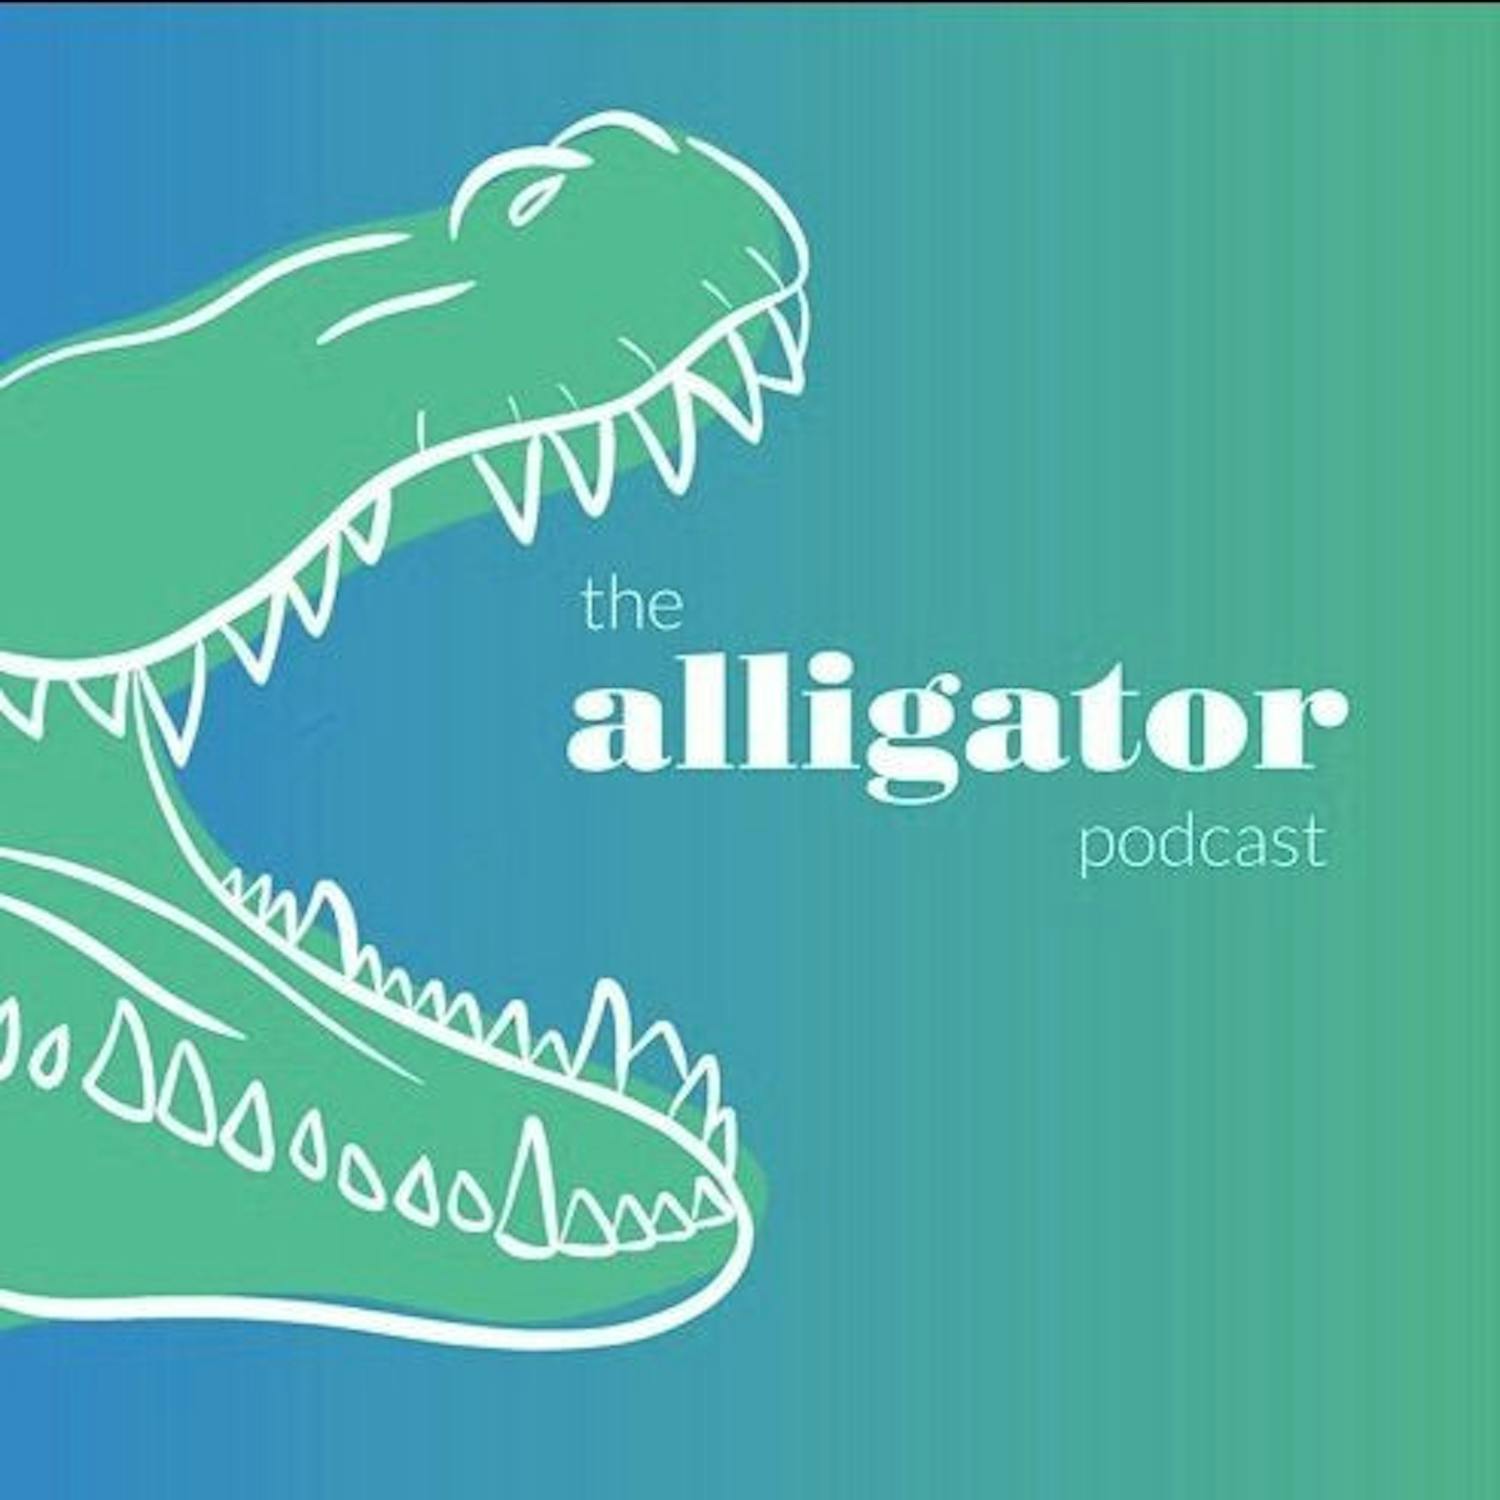 The Alligator Podcast recaps the biggest news stories published in the paper this week. 